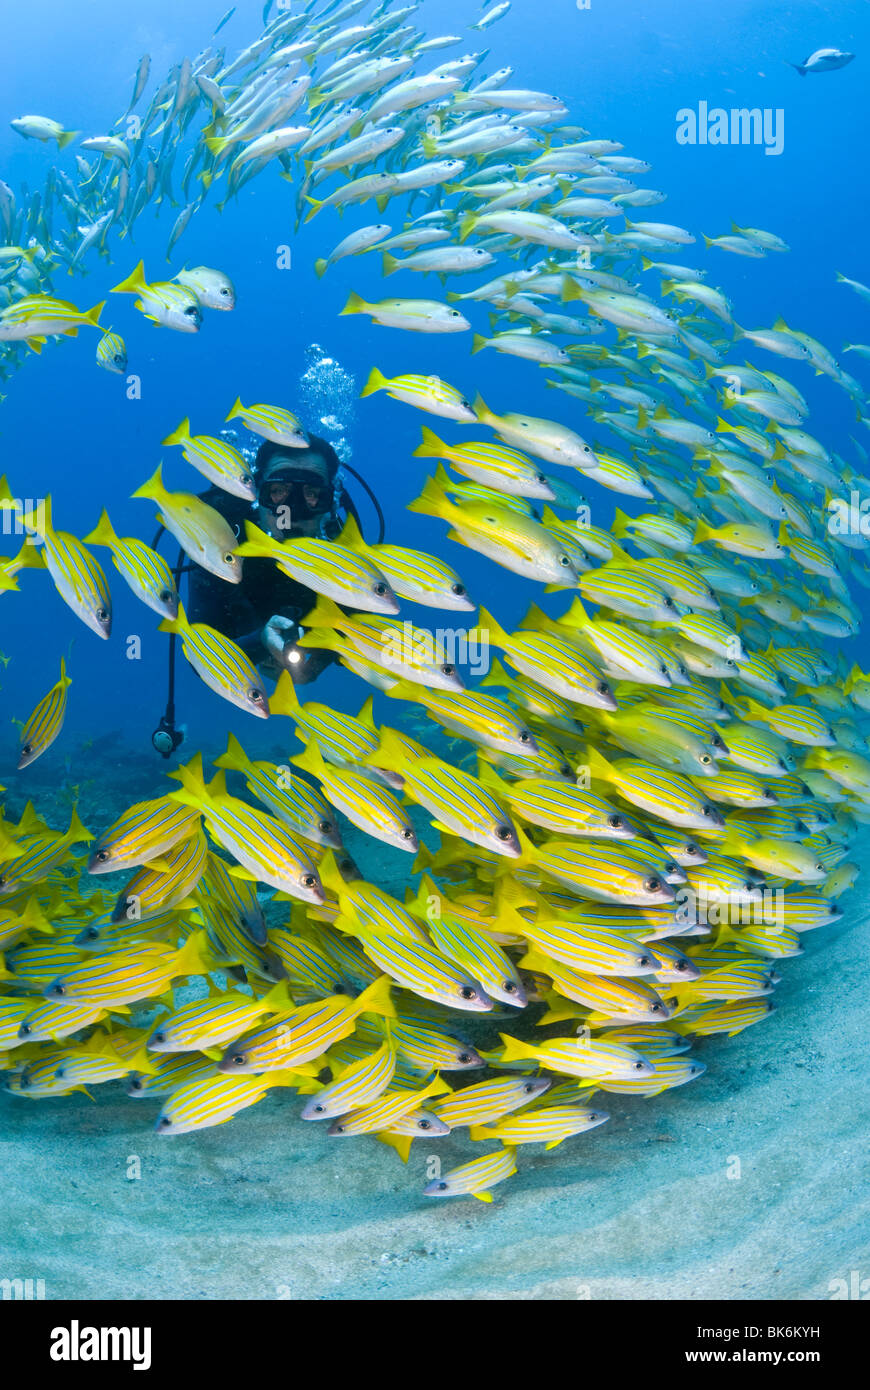 Scuba diver swimming with school of yellow french grunts, South Africa Stock Photo